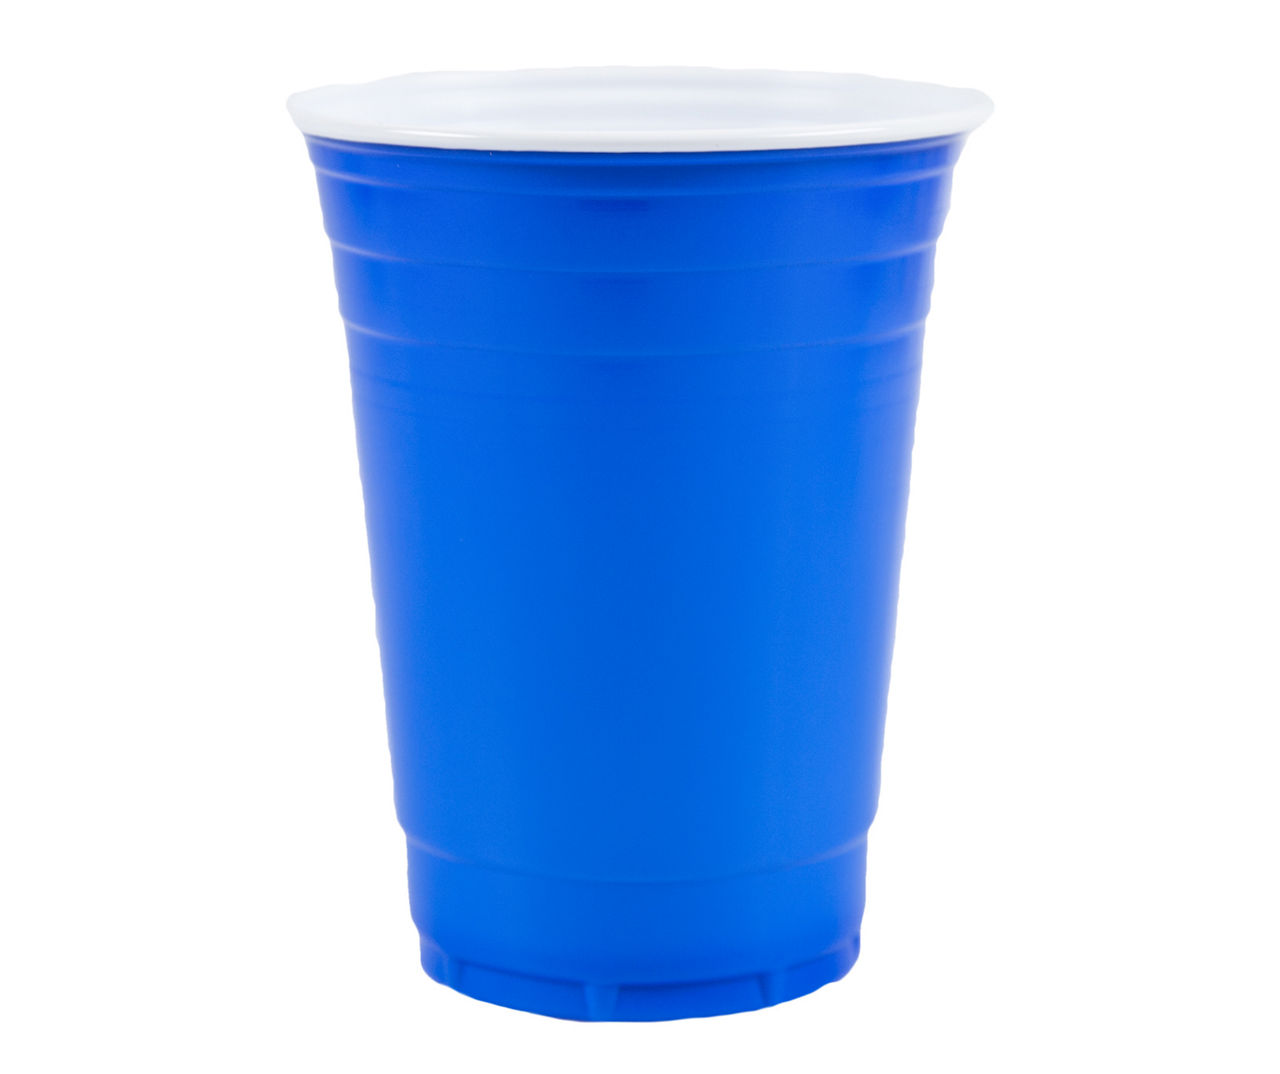 Blue 16 Oz. Heavy Duty Plastic Cups, 50-Count